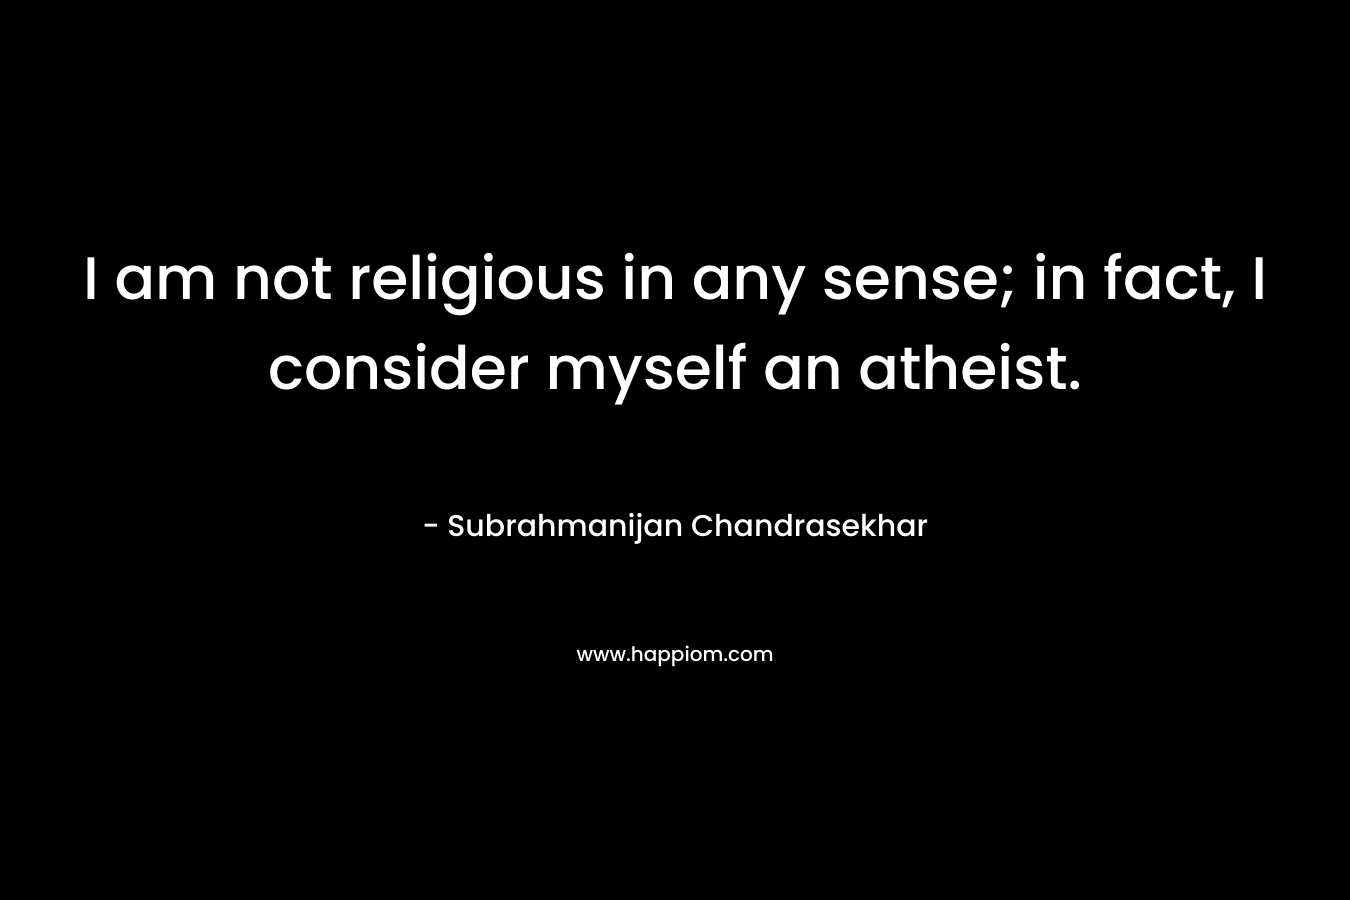 I am not religious in any sense; in fact, I consider myself an atheist.